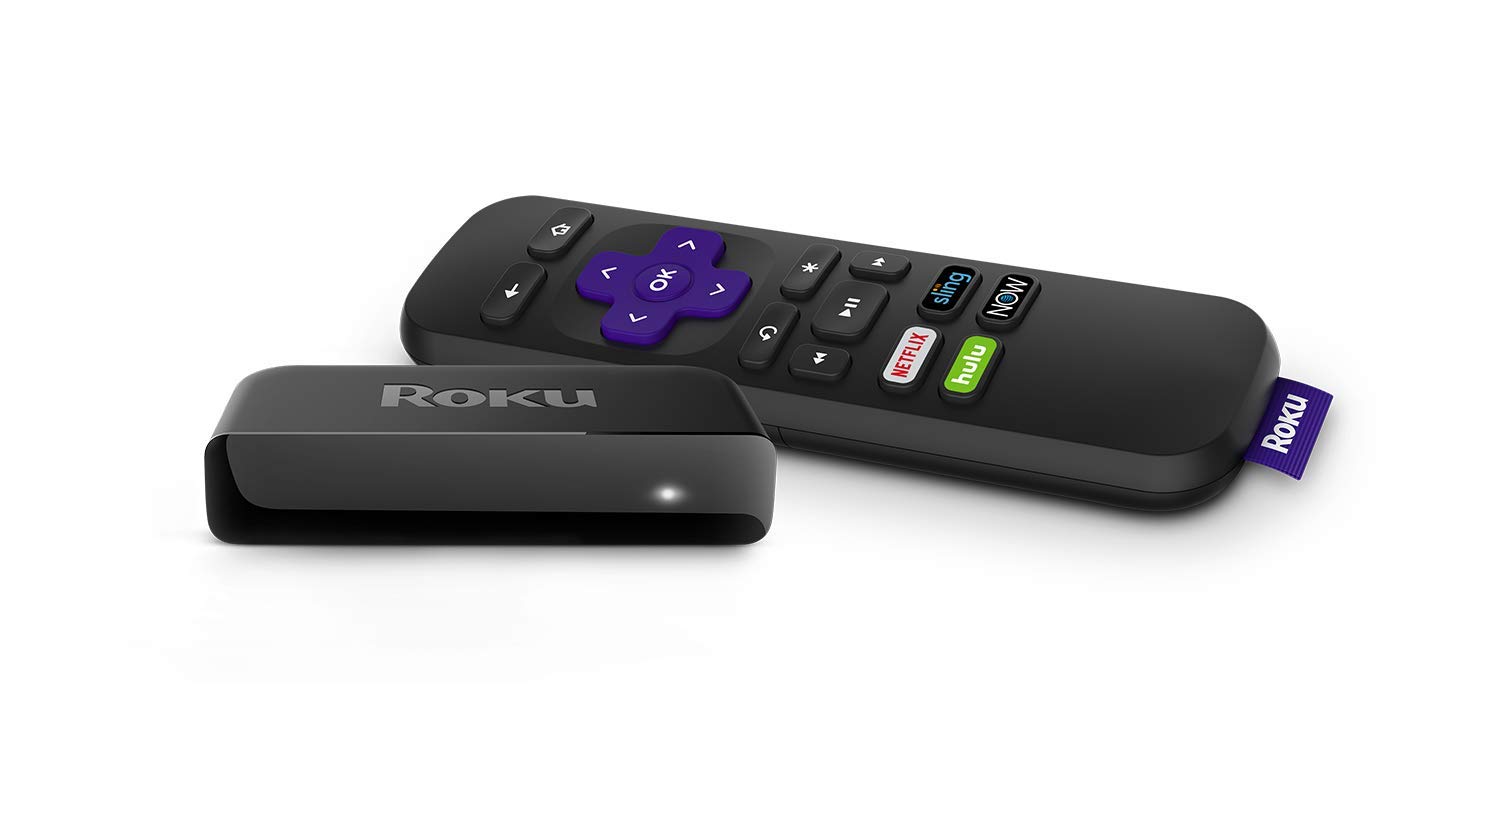 Roku’s 4K HDR Roku Premiere is on Sale For Just $29.95 With Free Hulu & Pandora For 3 Months